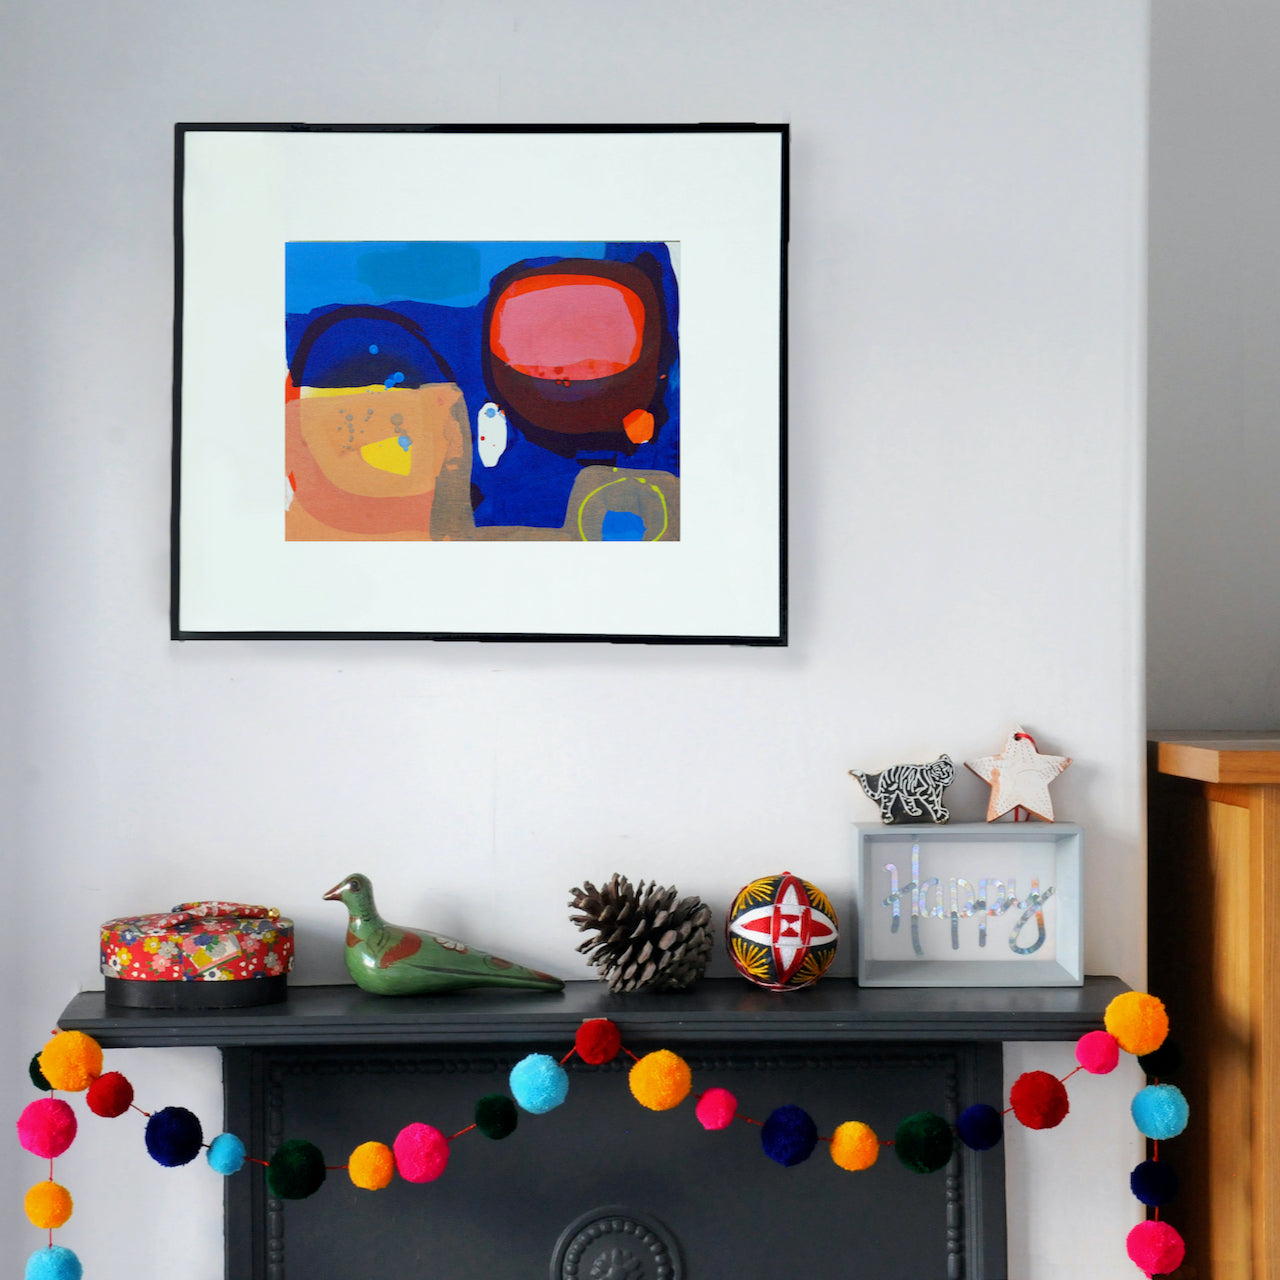 Abstract painting by artist Ella Carty with vibrant blues, pinks, reds, peach and yellow.